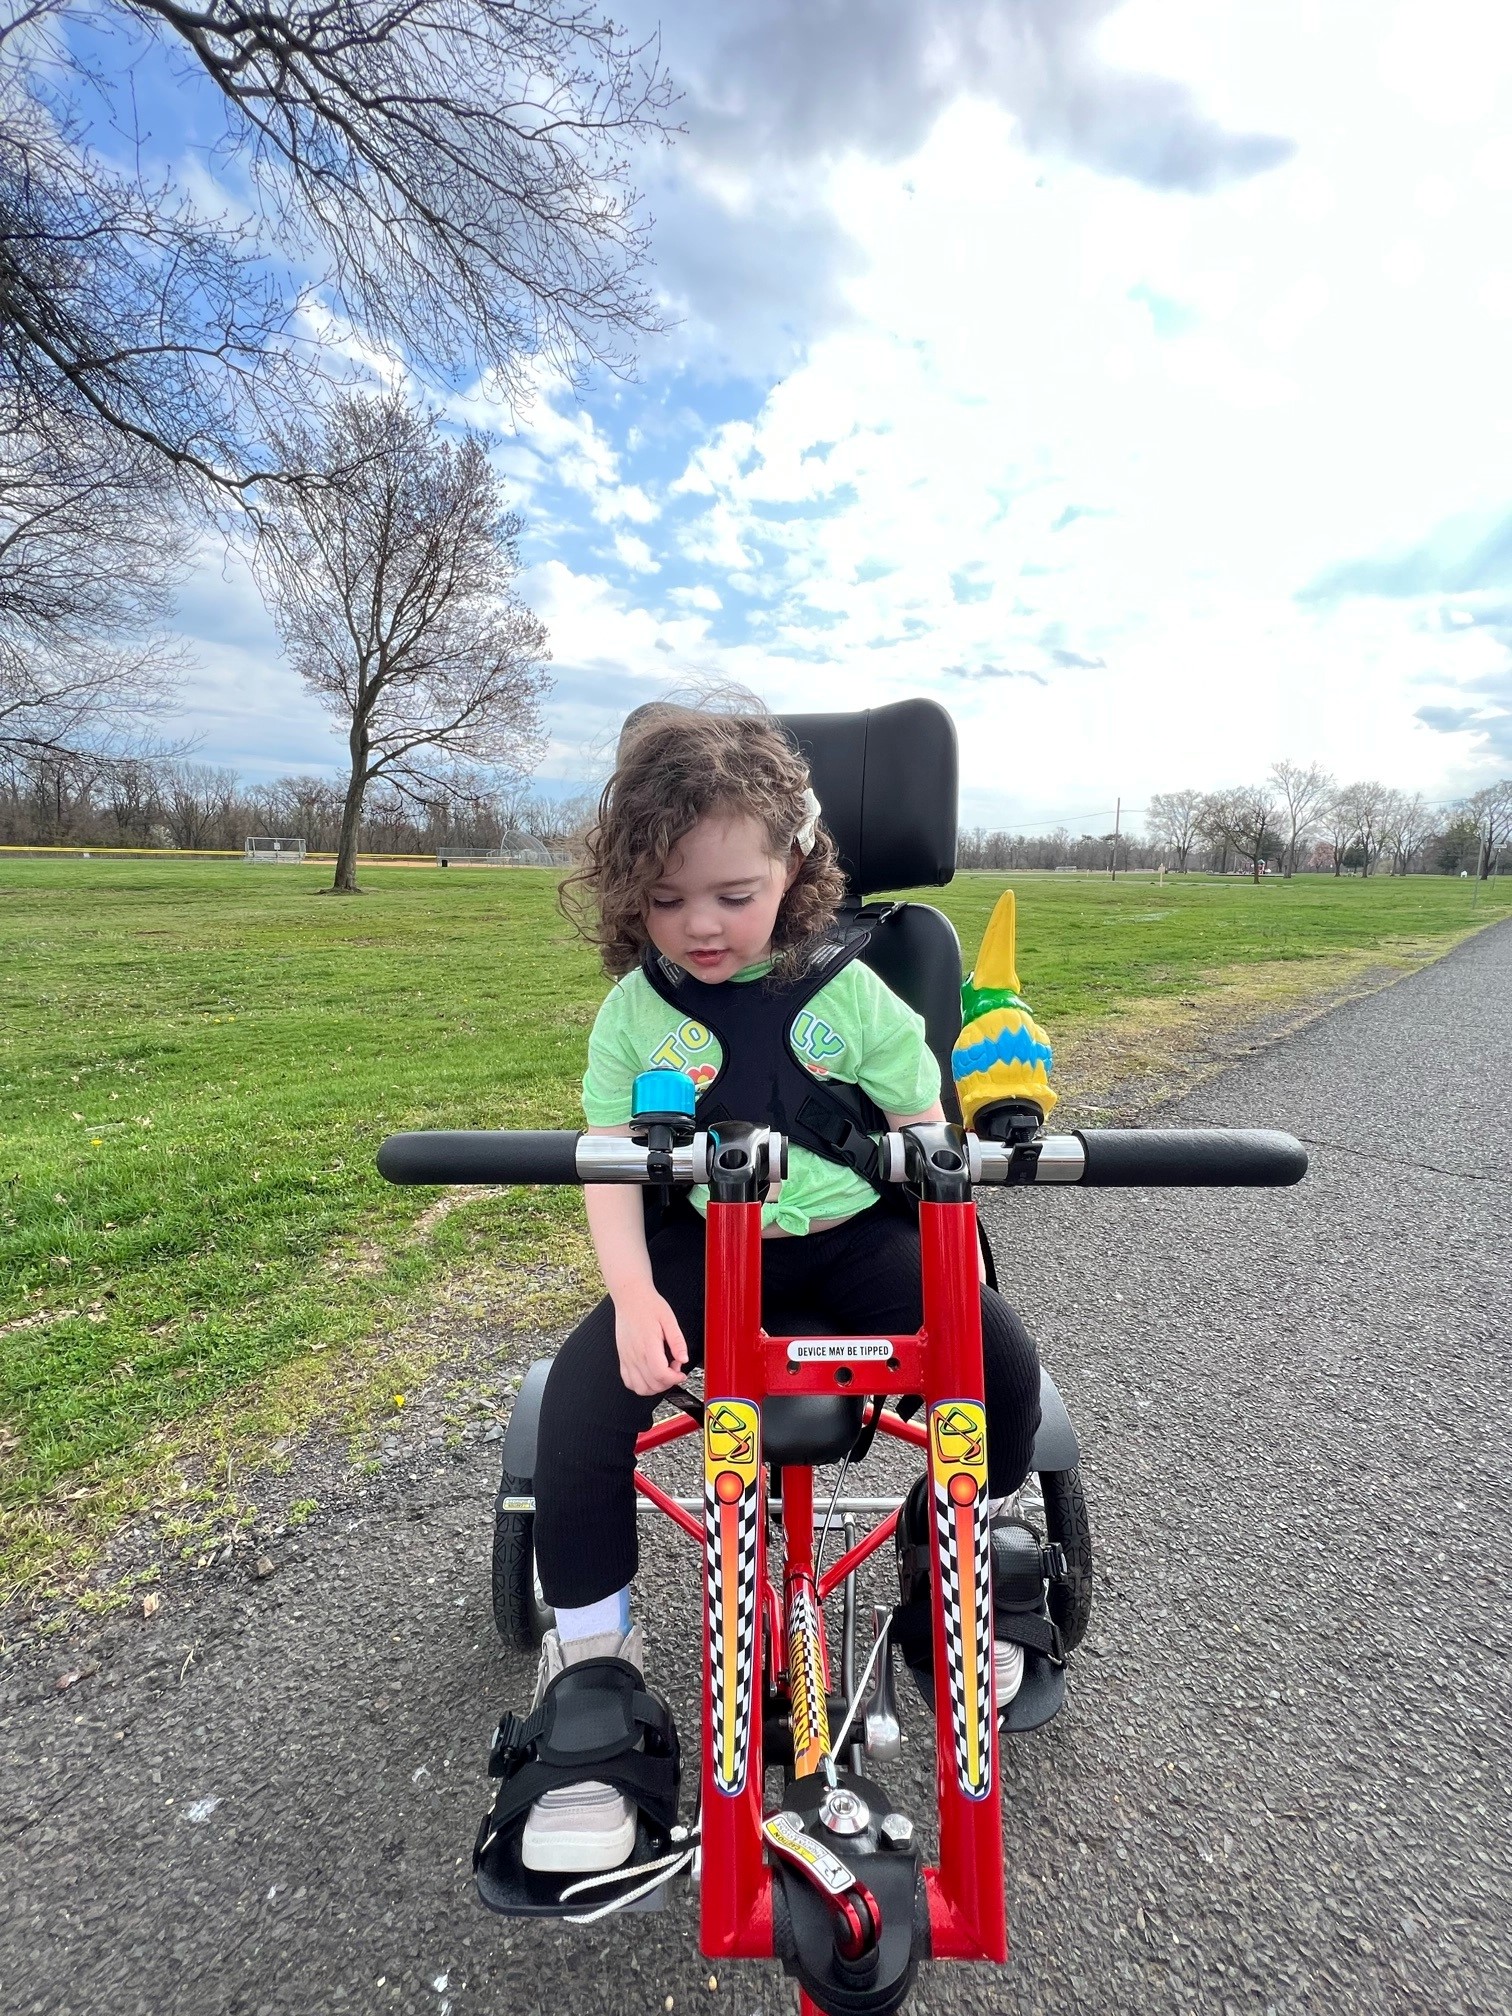 Ava on her mobility bike